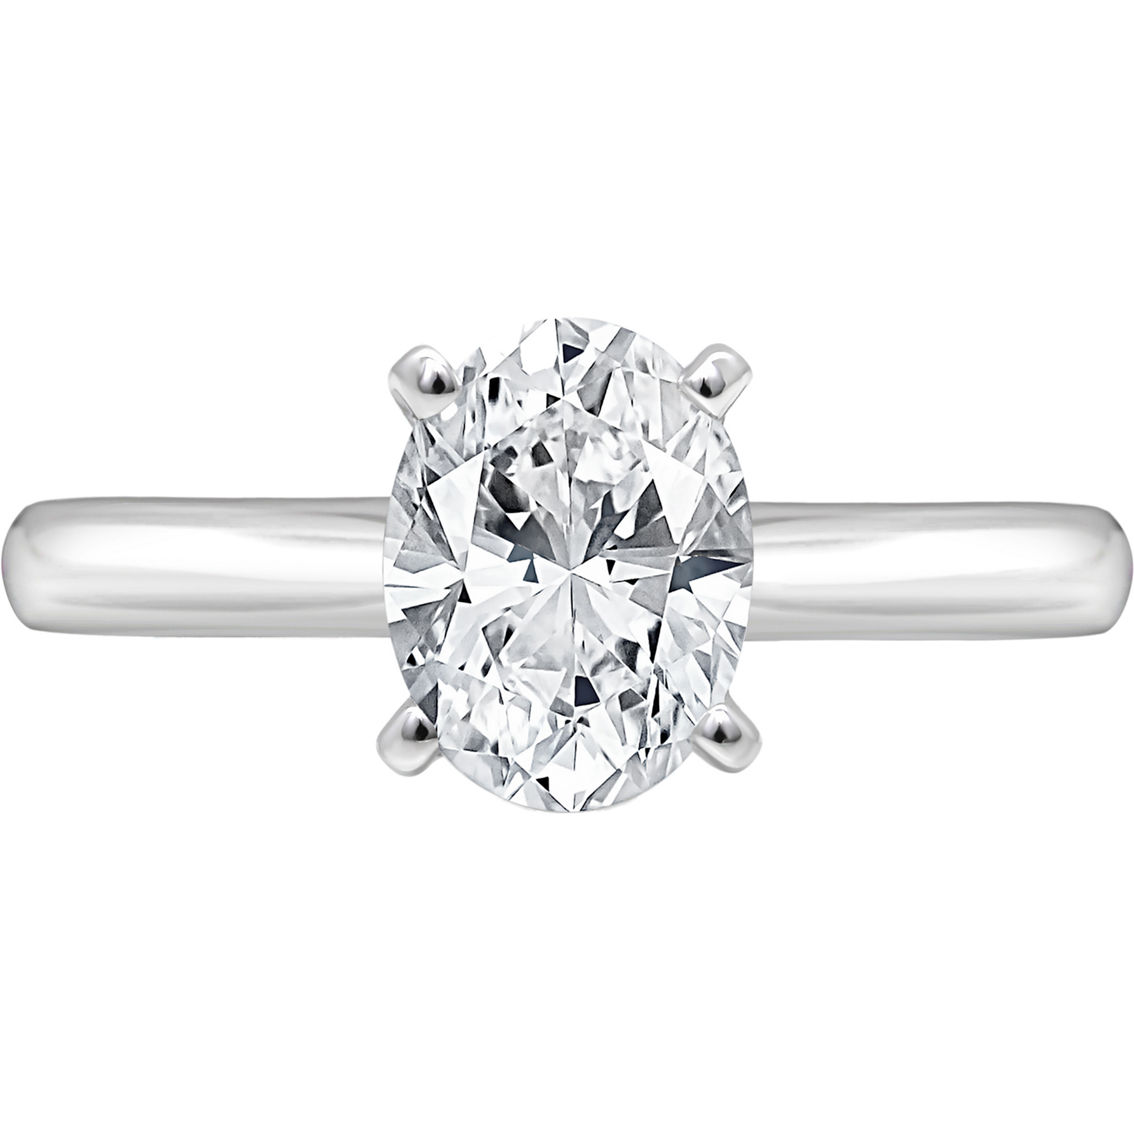 Ray of Brilliance 14K White Gold 2 CTW Lab Grown Oval Diamond Solitaire Ring - Image 4 of 4